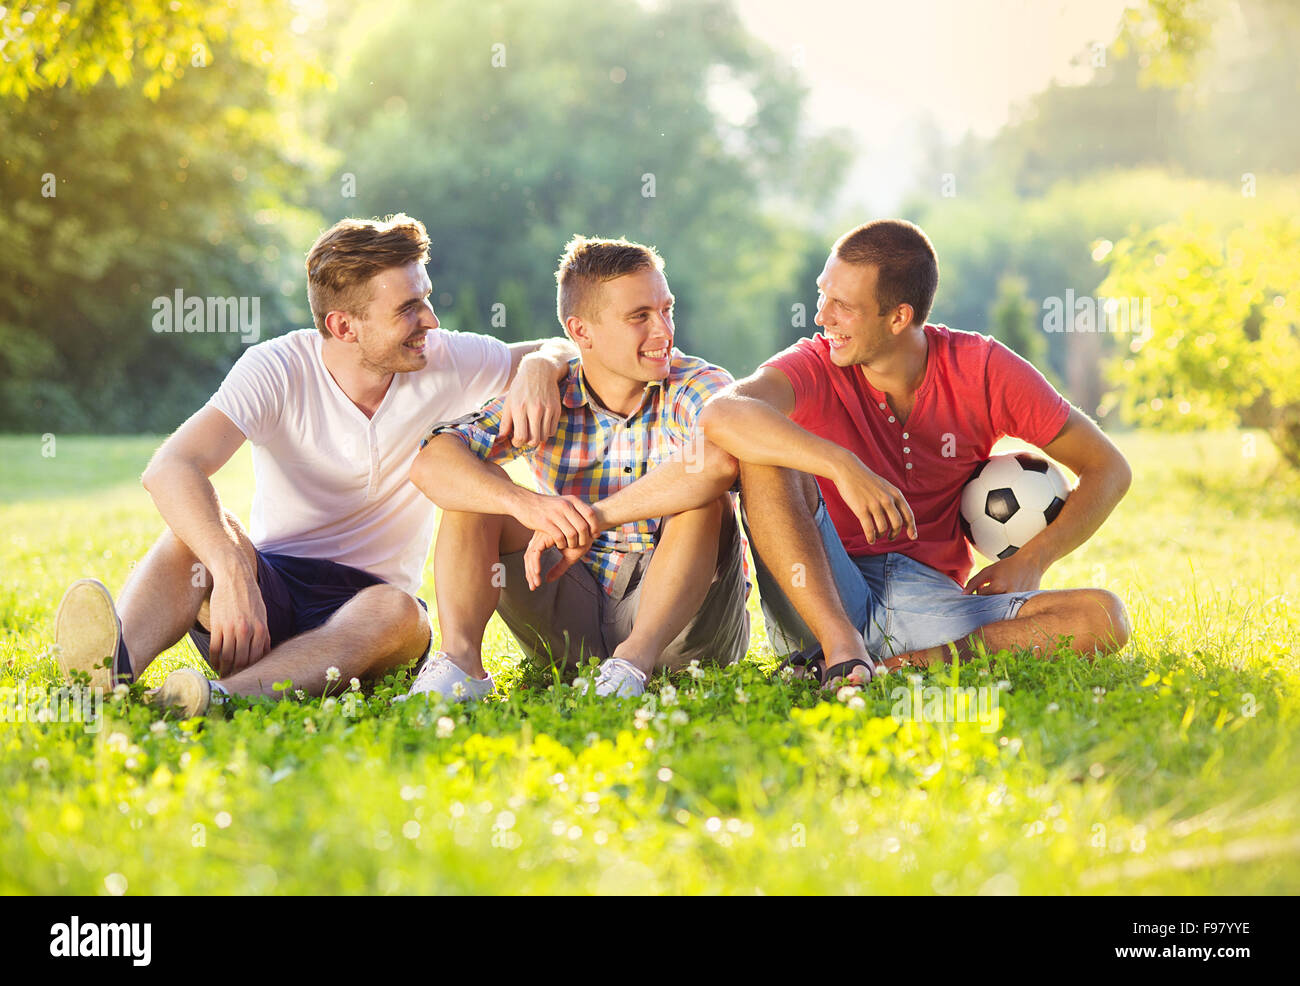 Three happy friends spending free time together in park sitting on grass and chatting Stock Photo